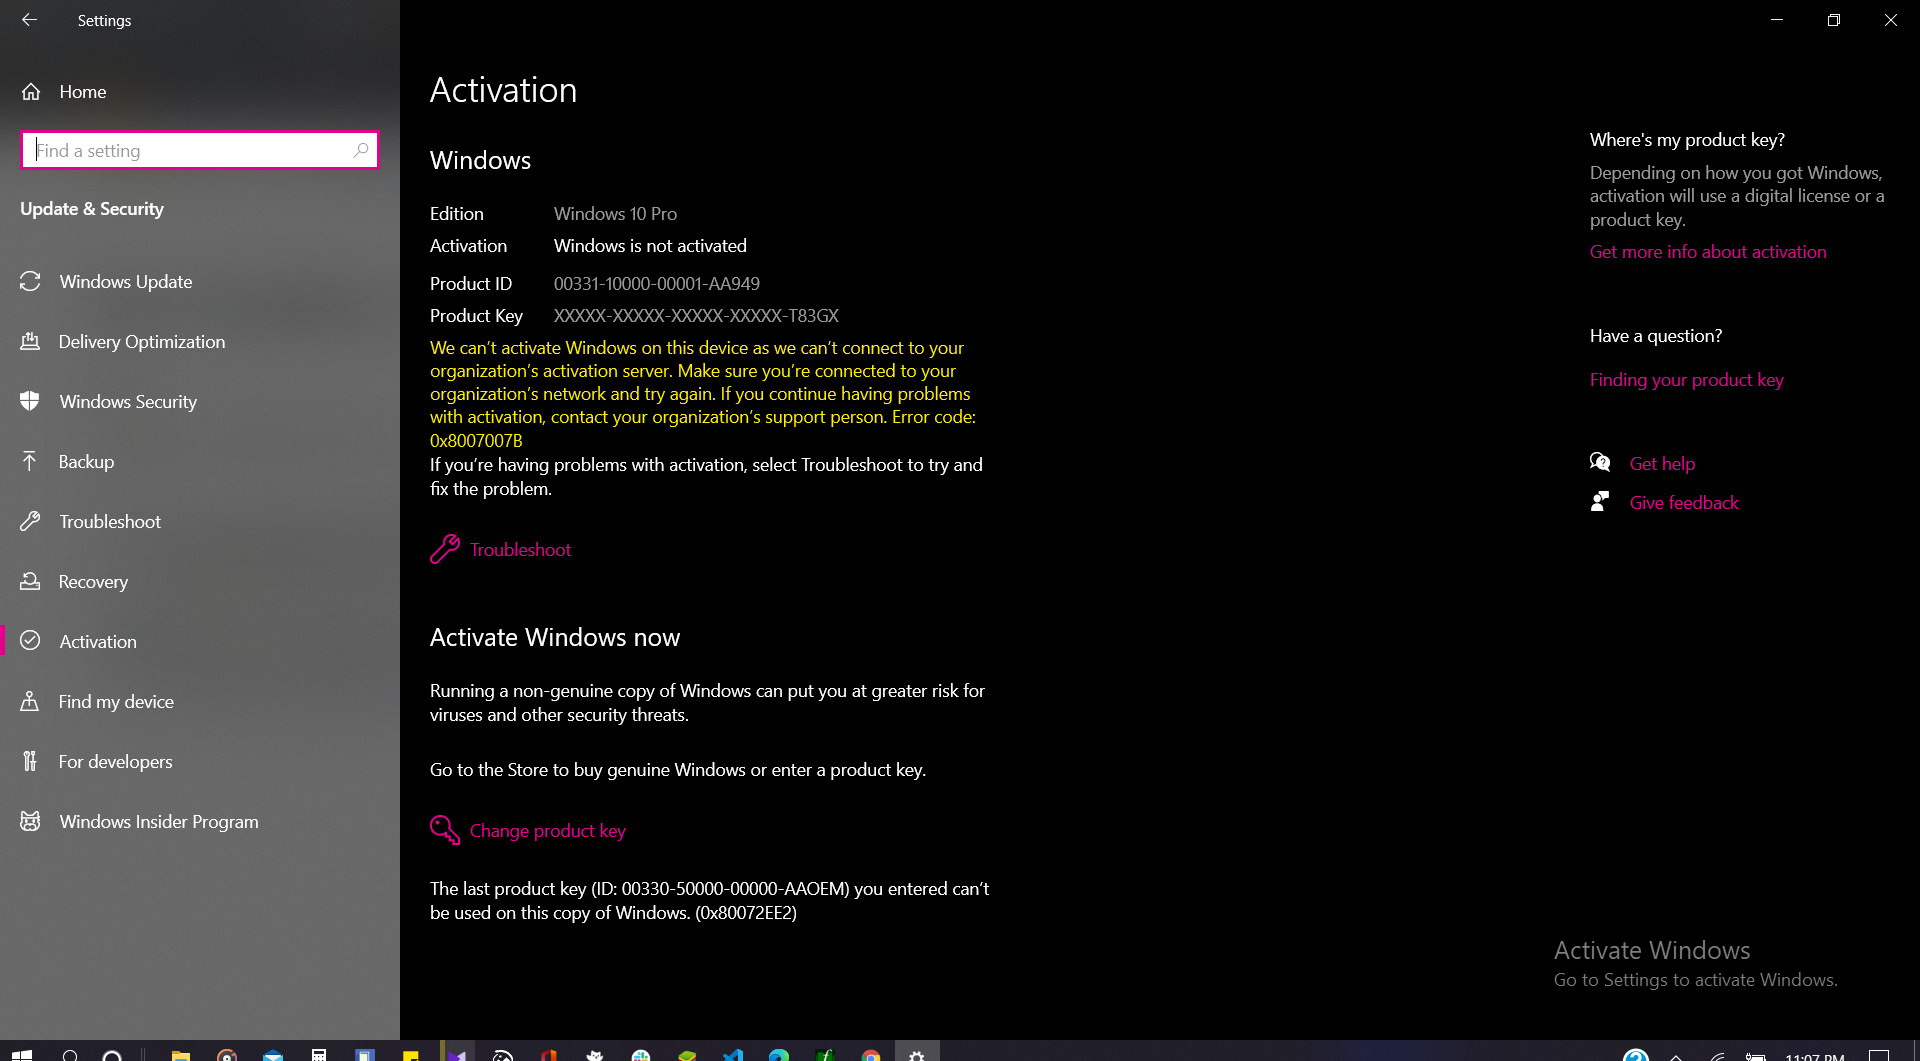 windows won't activate. Troubleshoot not working 0803f5f6-cd9e-4966-bc3a-c6042847a65d?upload=true.png